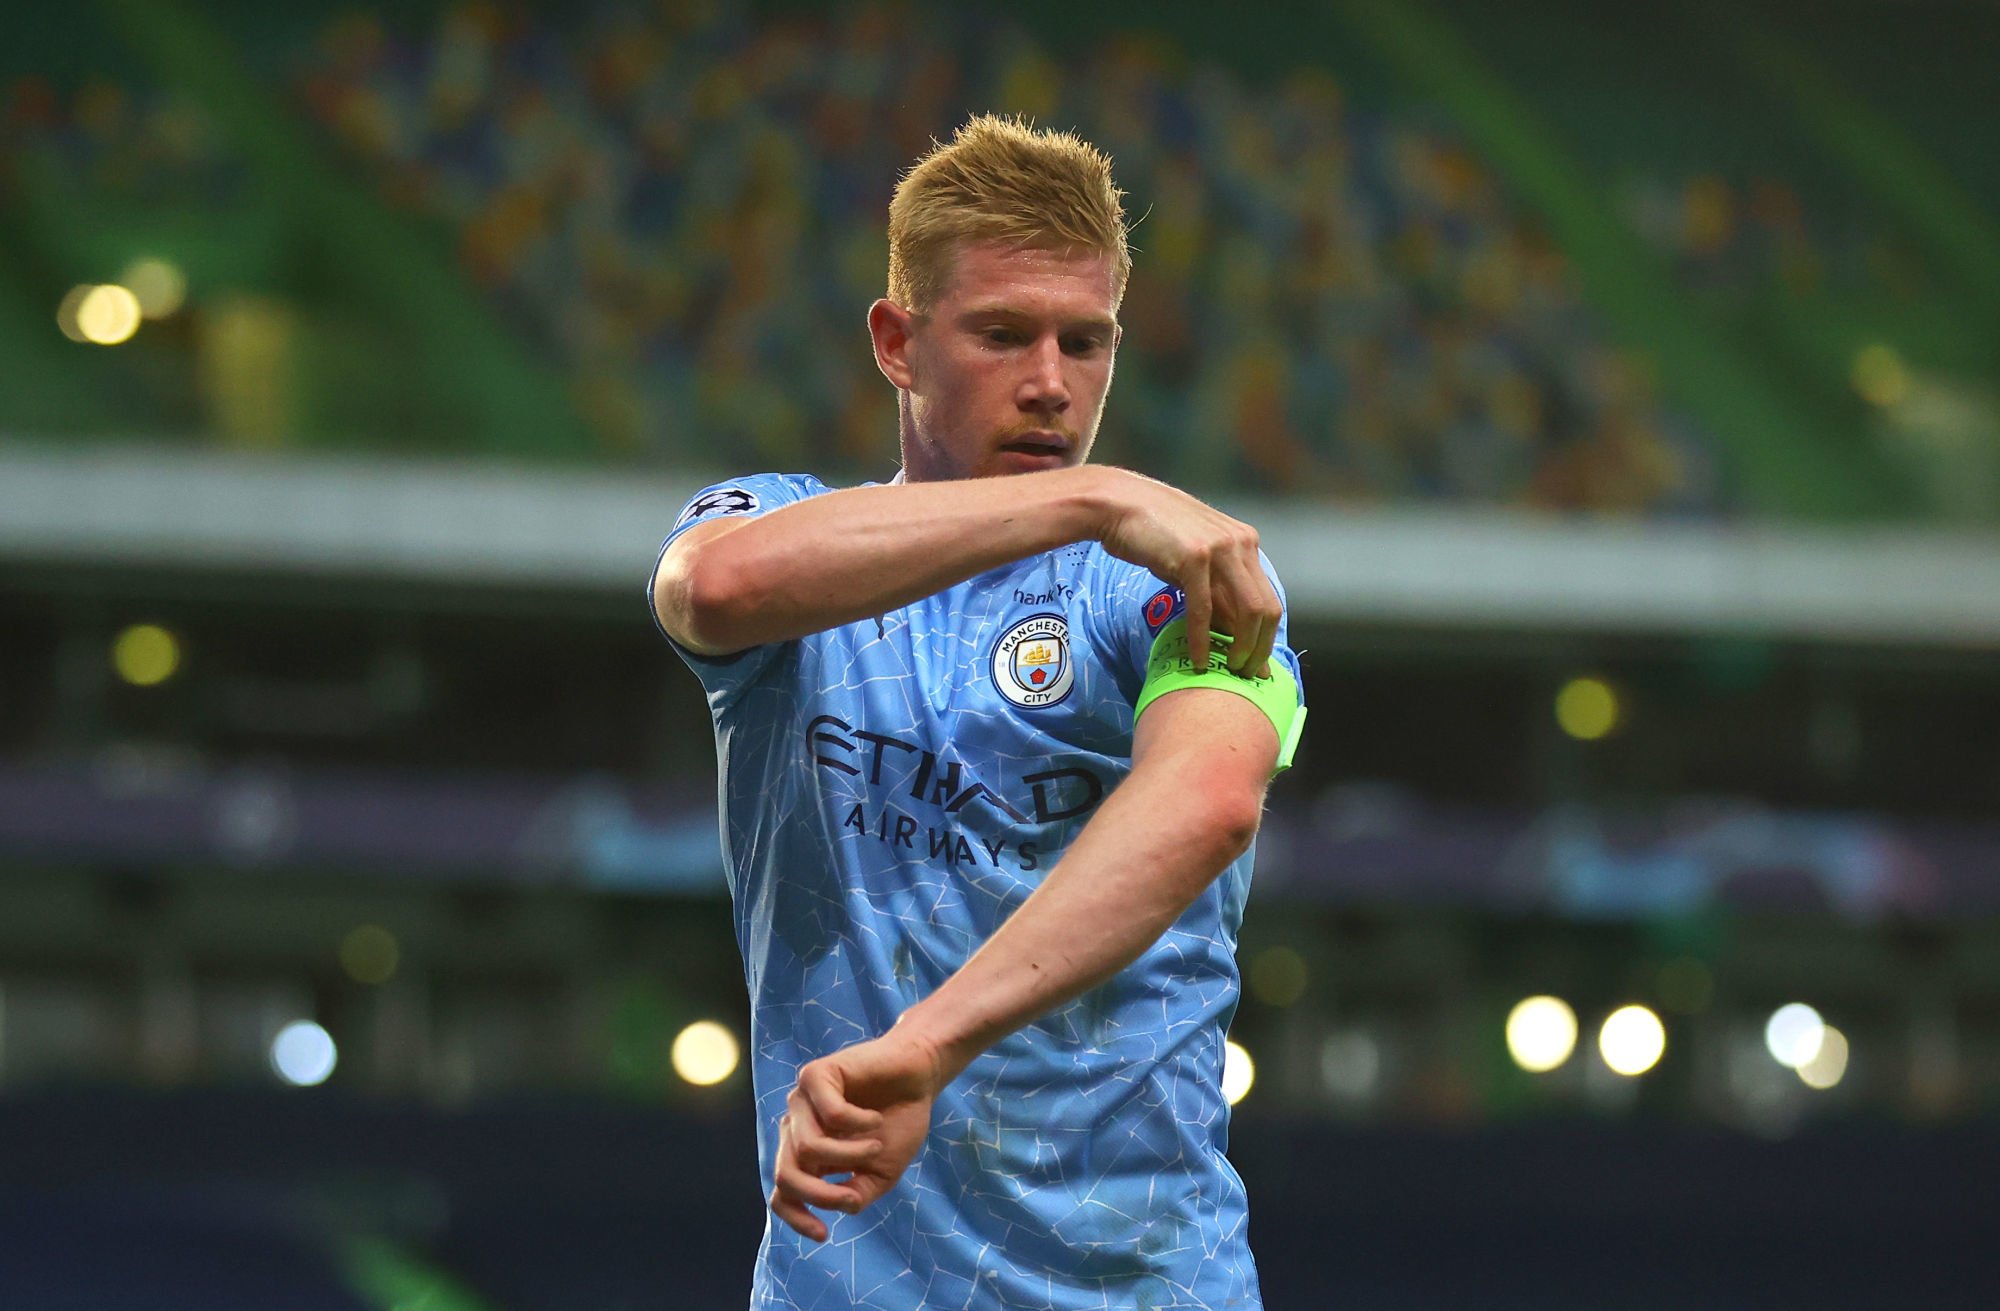 LISBON, PORTUGAL - AUGUST 15: Kevin De Bruyne of Manchester City adjusts his captains armband during the UEFA Champions League Quarter Final match between Manchester City and Lyon at Estadio Jose Alvalade on August 15, 2020 in Lisbon, Portugal. (Photo by Julian Finney - UEFA/UEFA via Getty Images) 
By Icon Sport - Kevin DE BRUYNE - Estadio Jose Alvalade - Lisbonne (Portugal)